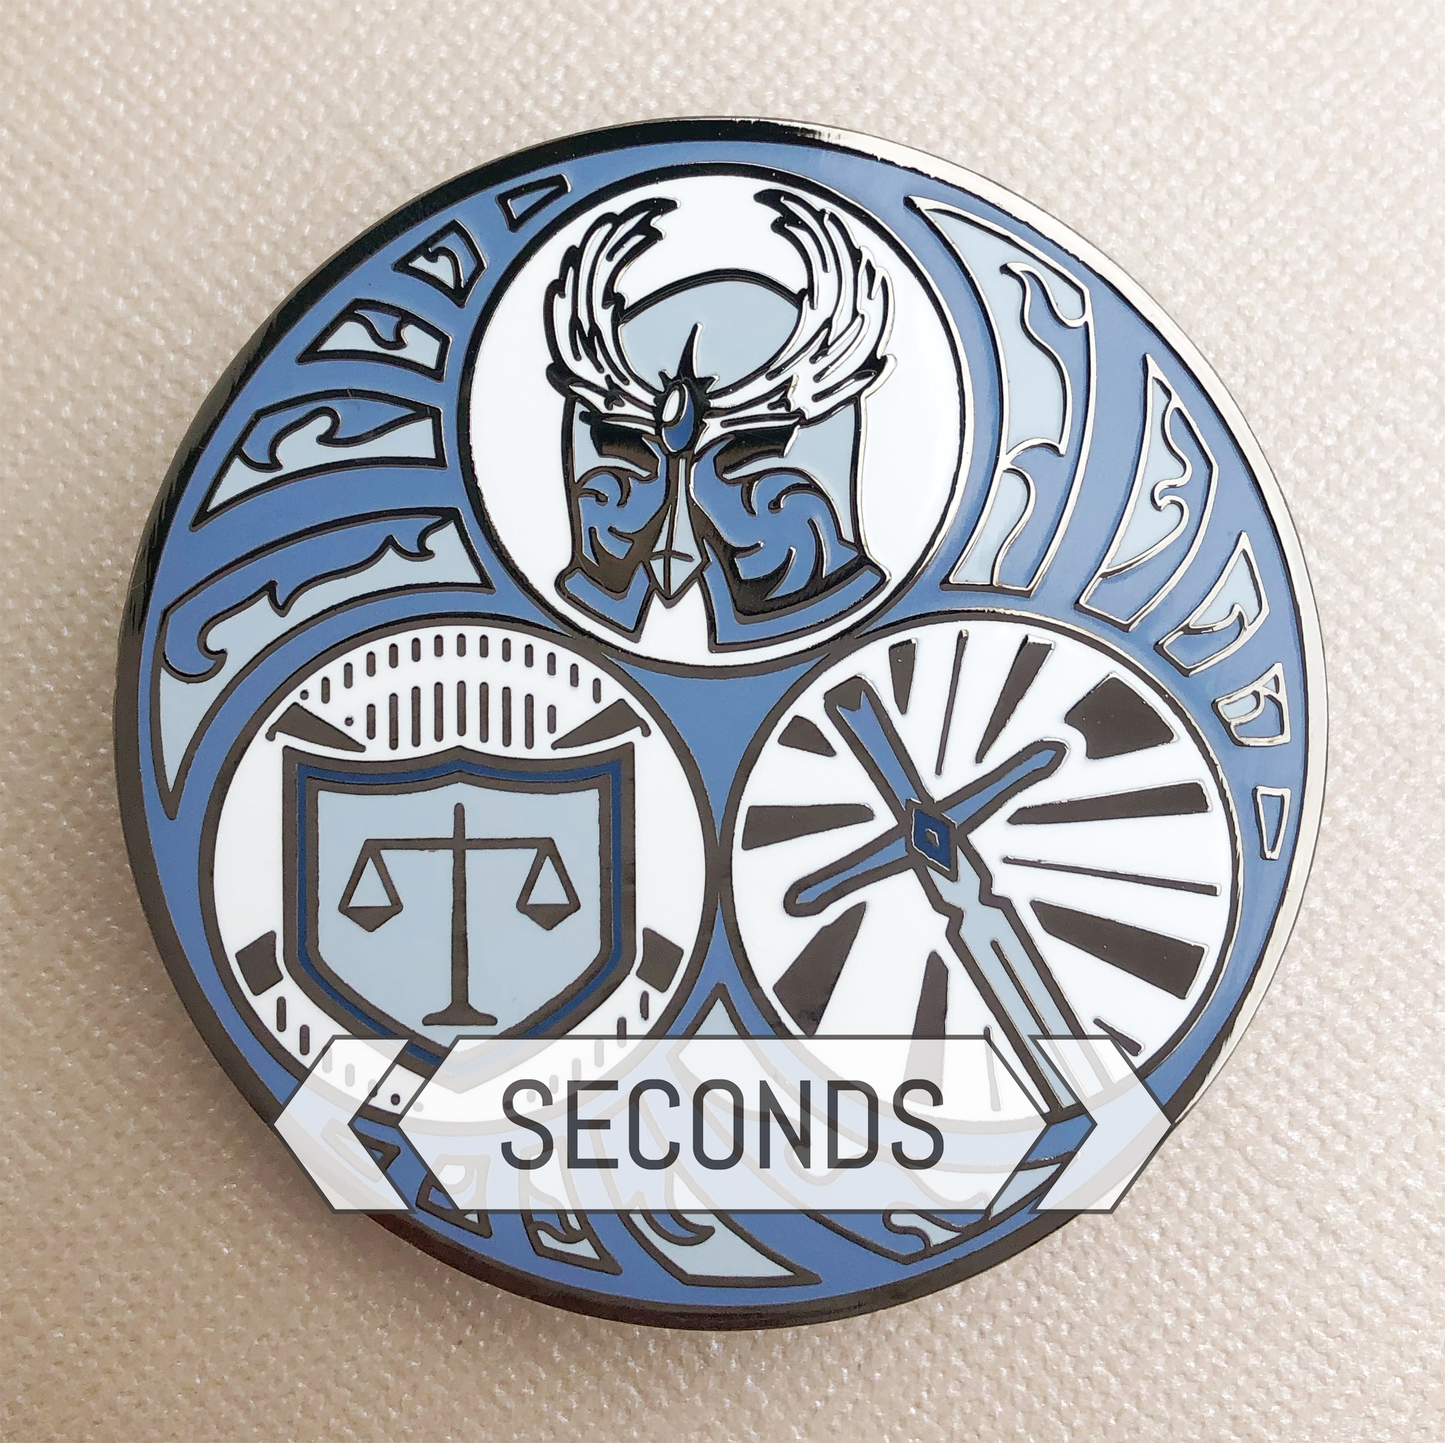 SECONDS Paladin (50 mm) "Divine Protector"